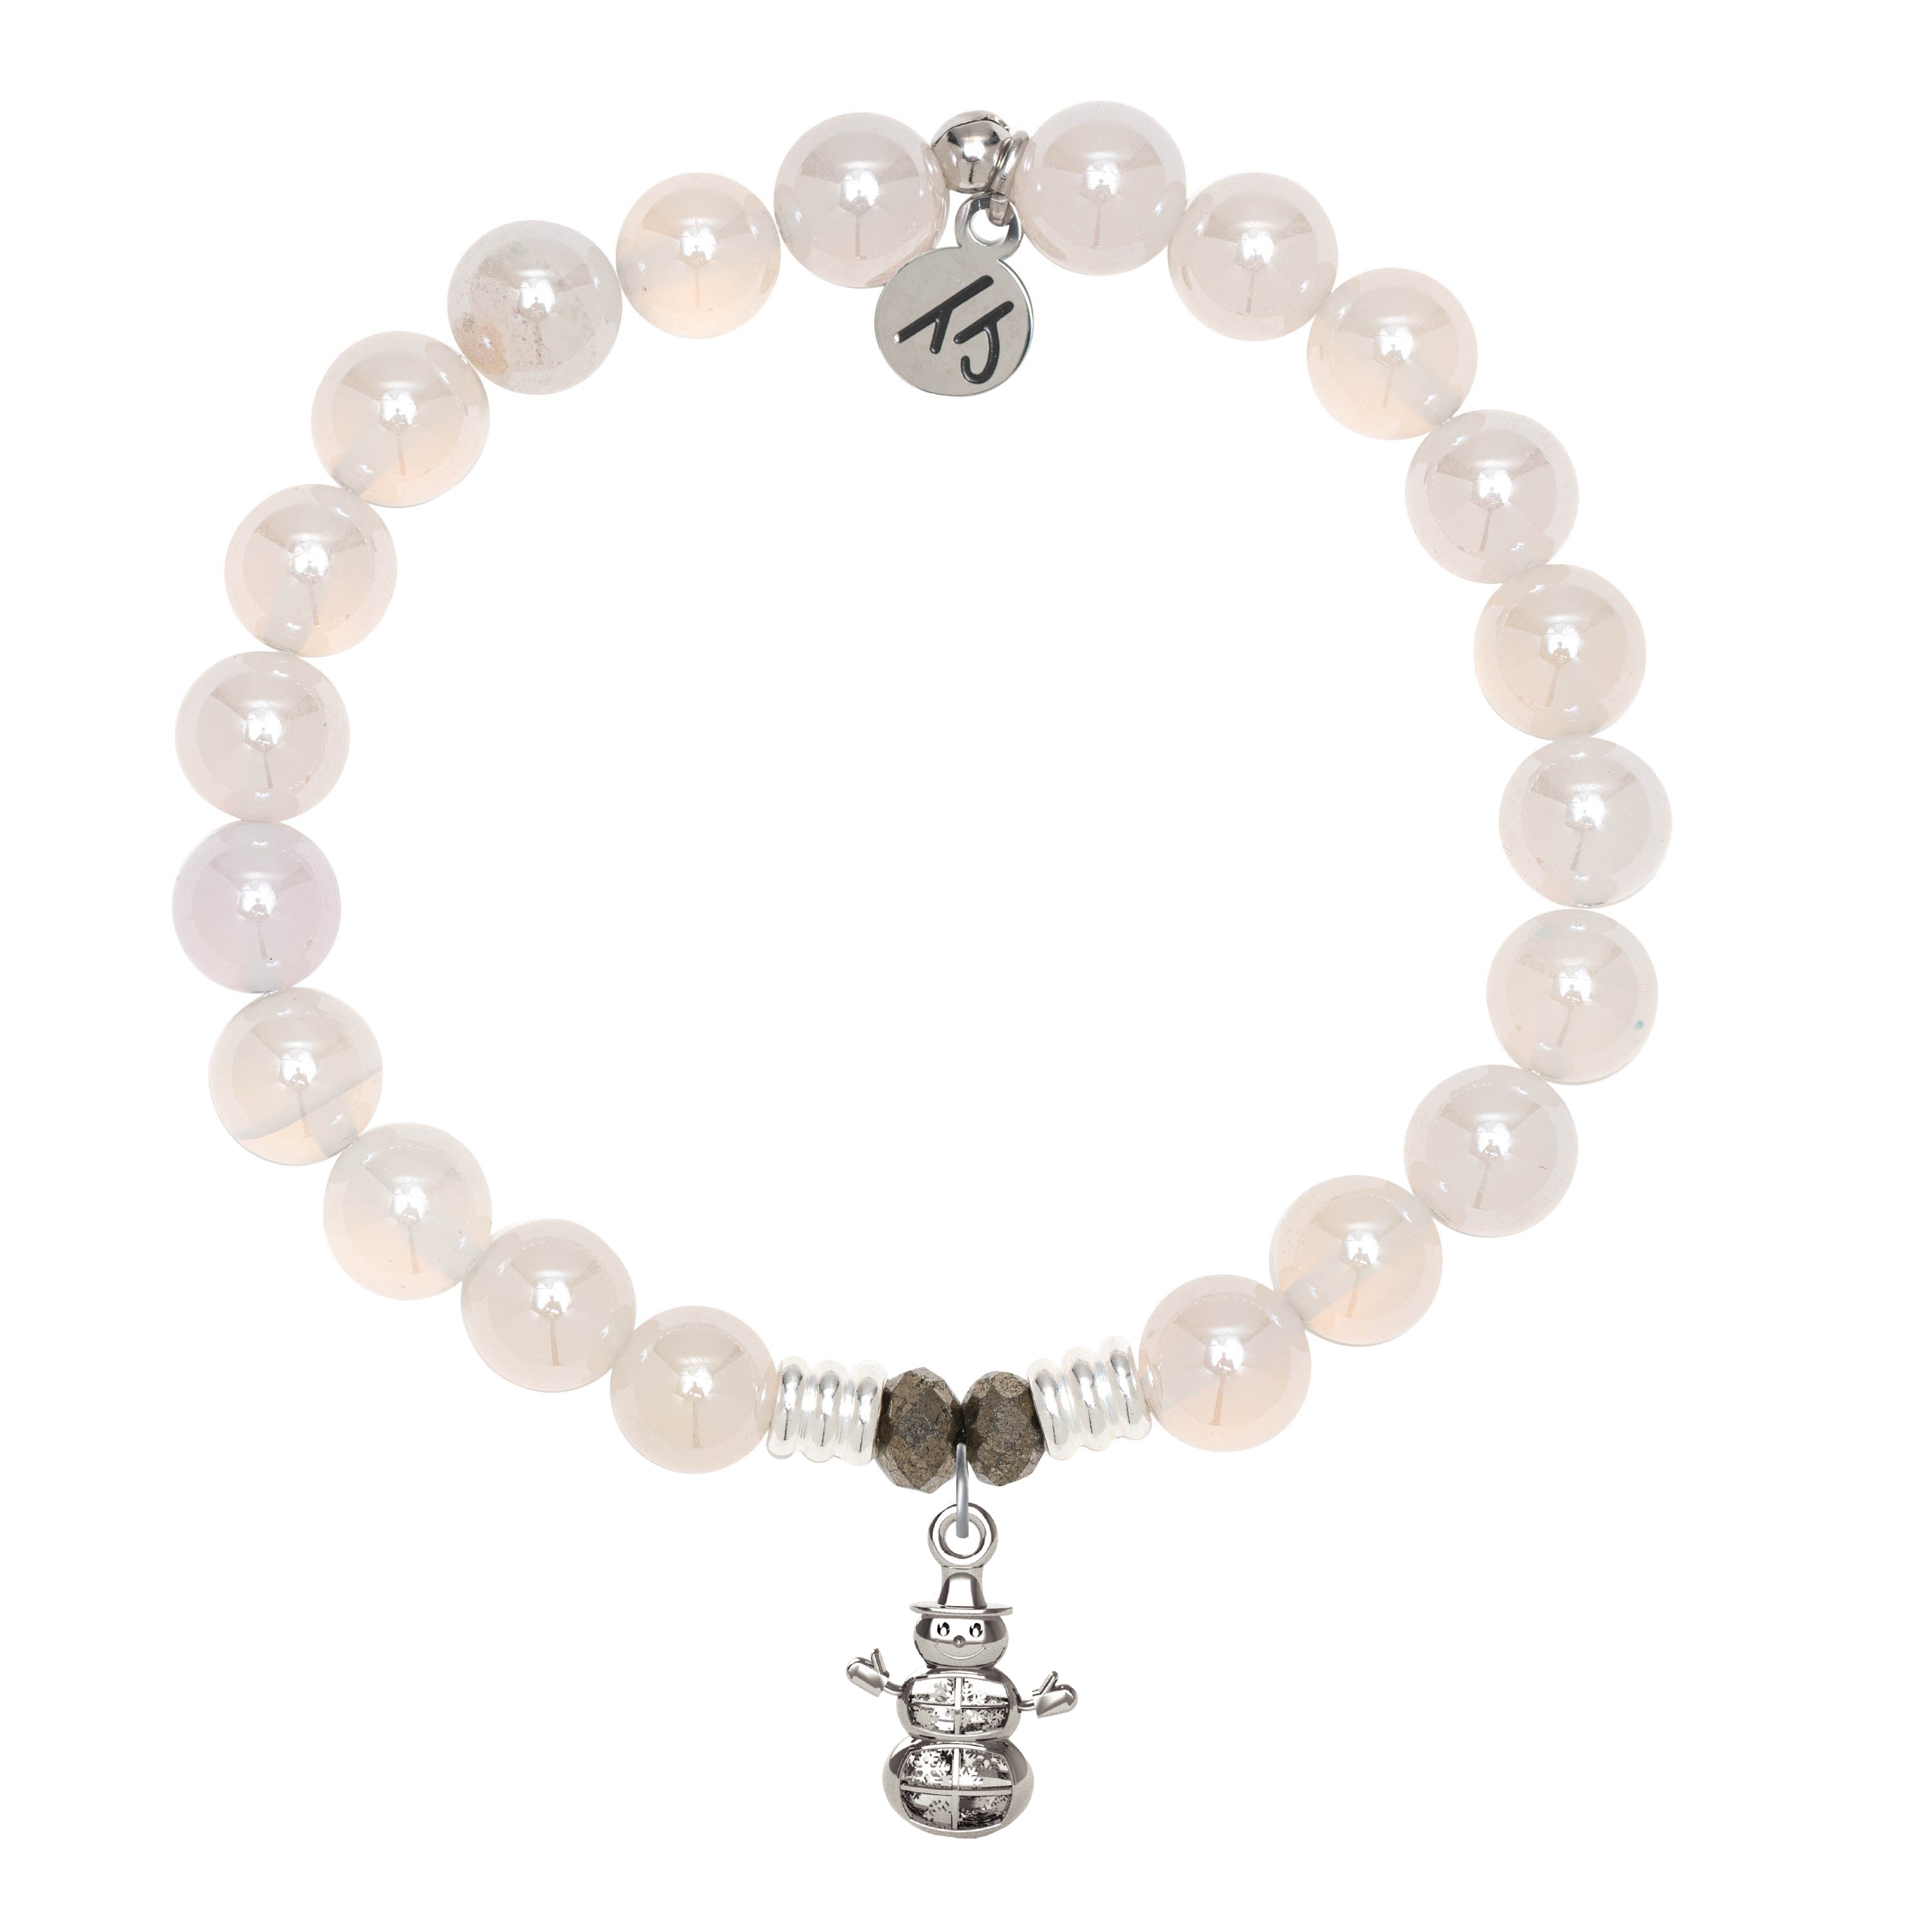 White Agate Stone Bracelet with Snowman Sterling Silver Charm